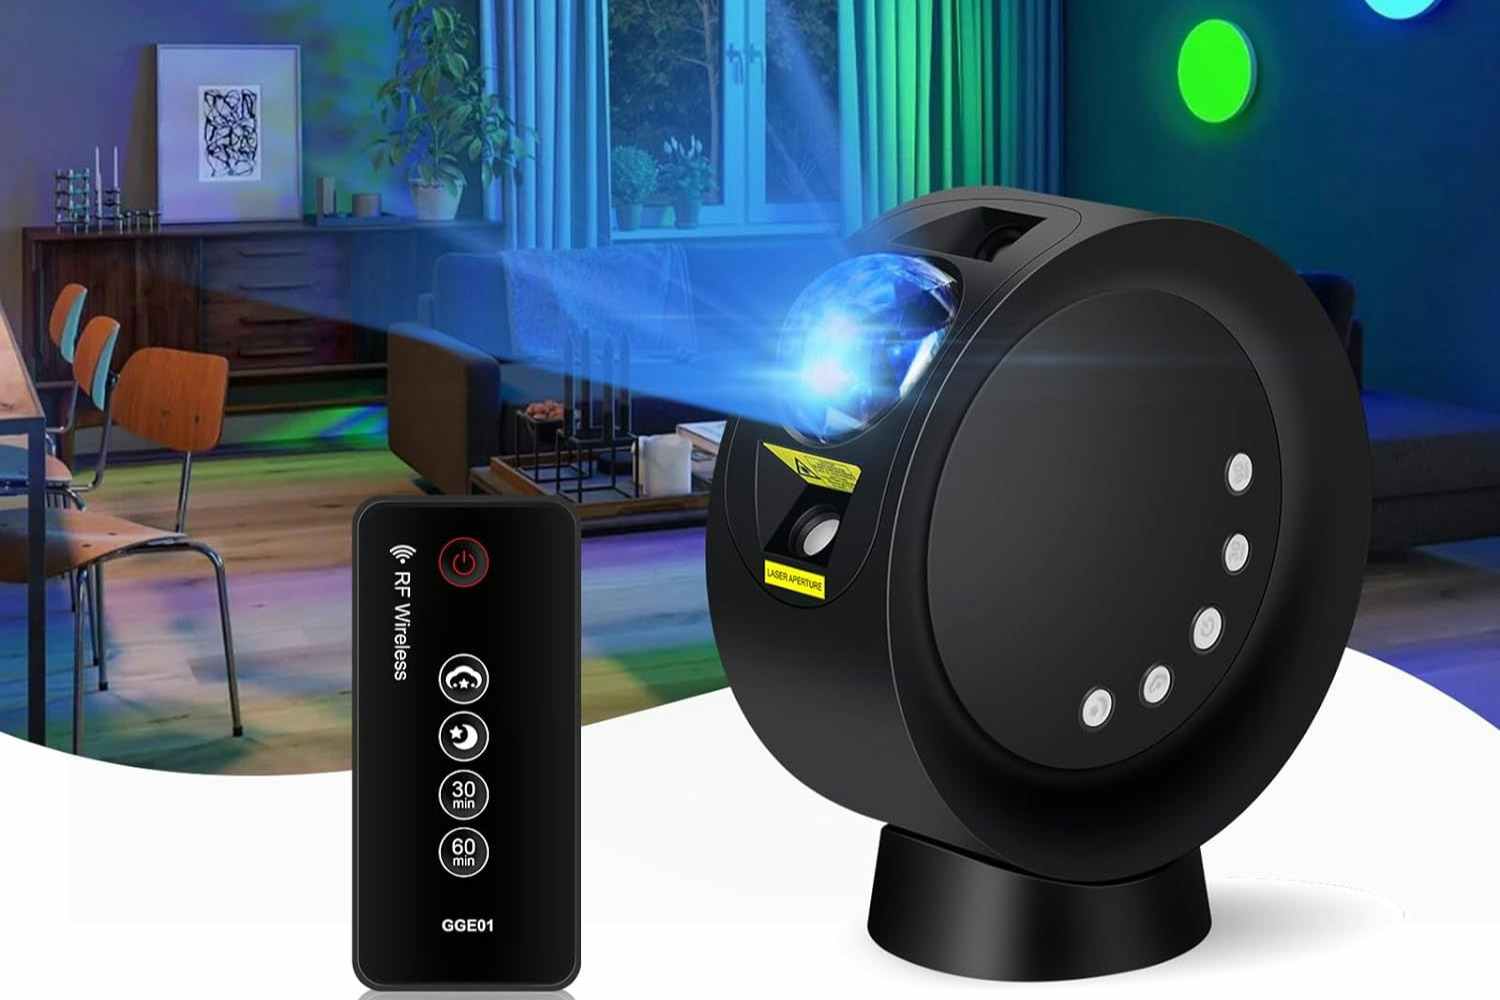 Galaxy Star Projector With Remote, Just $12 on Amazon